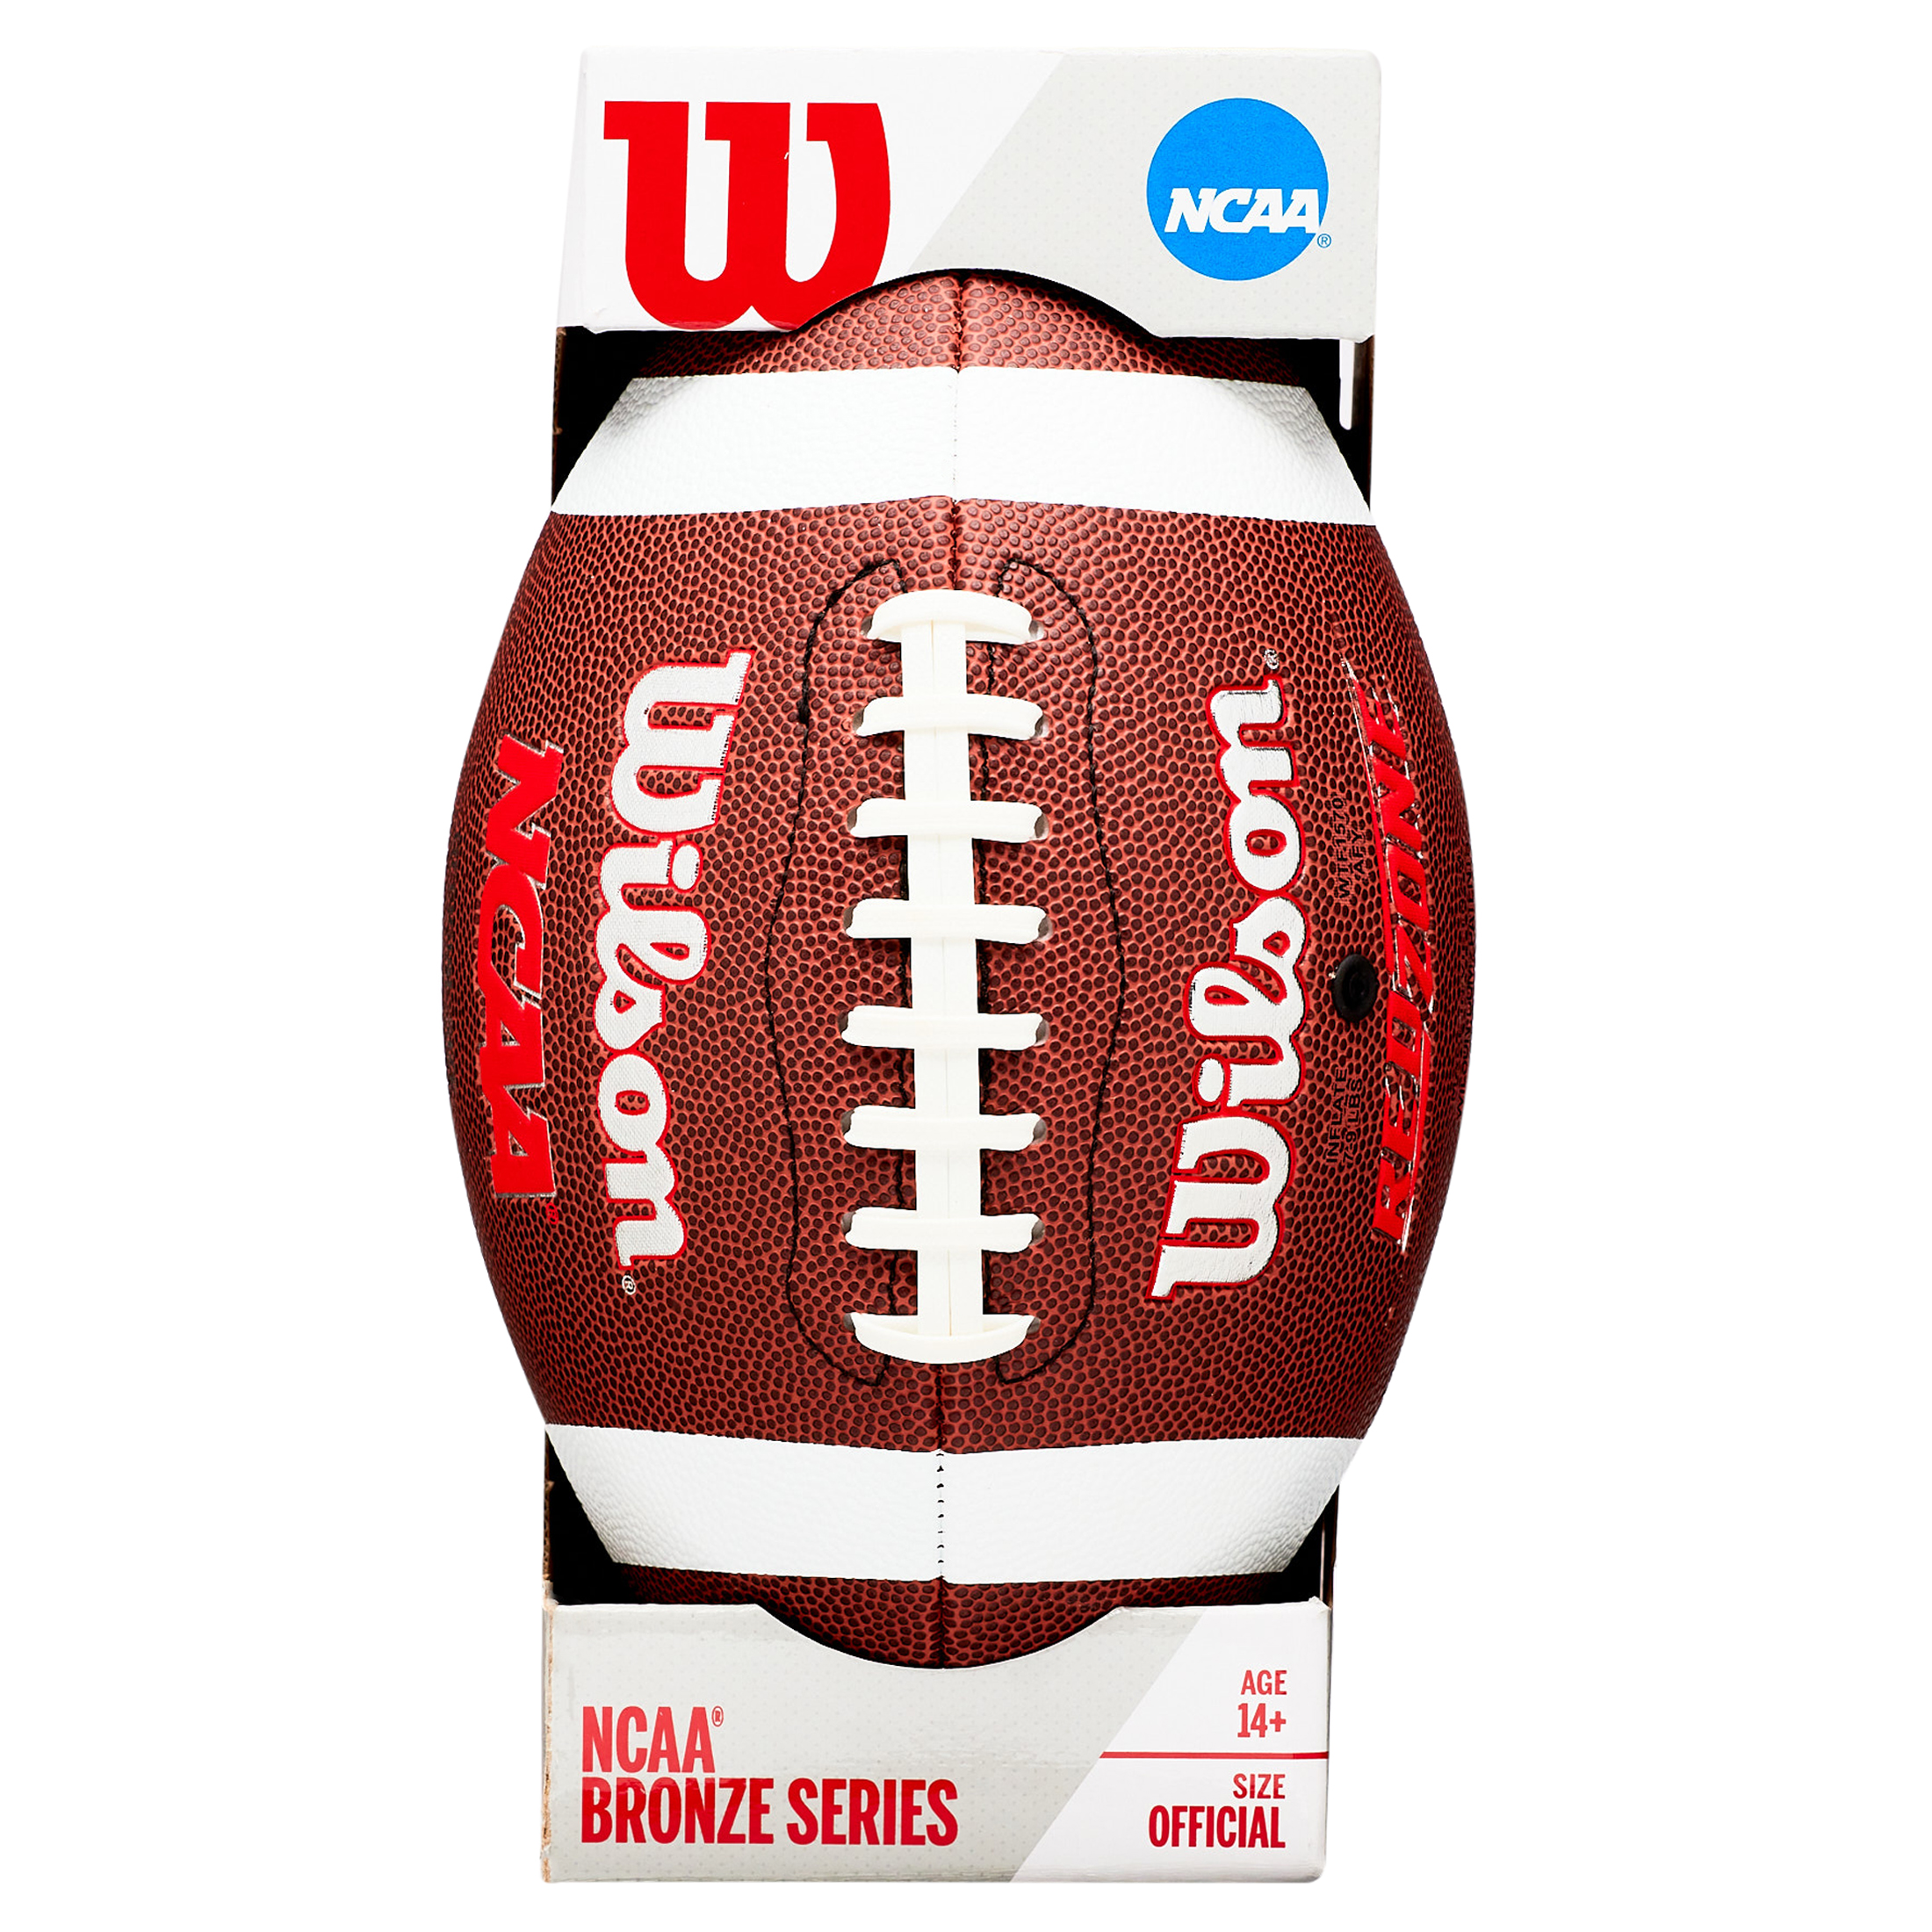 Wilson NCAA Red Zone Composite Football, Official Size (Ages 14 and up) - image 2 of 6